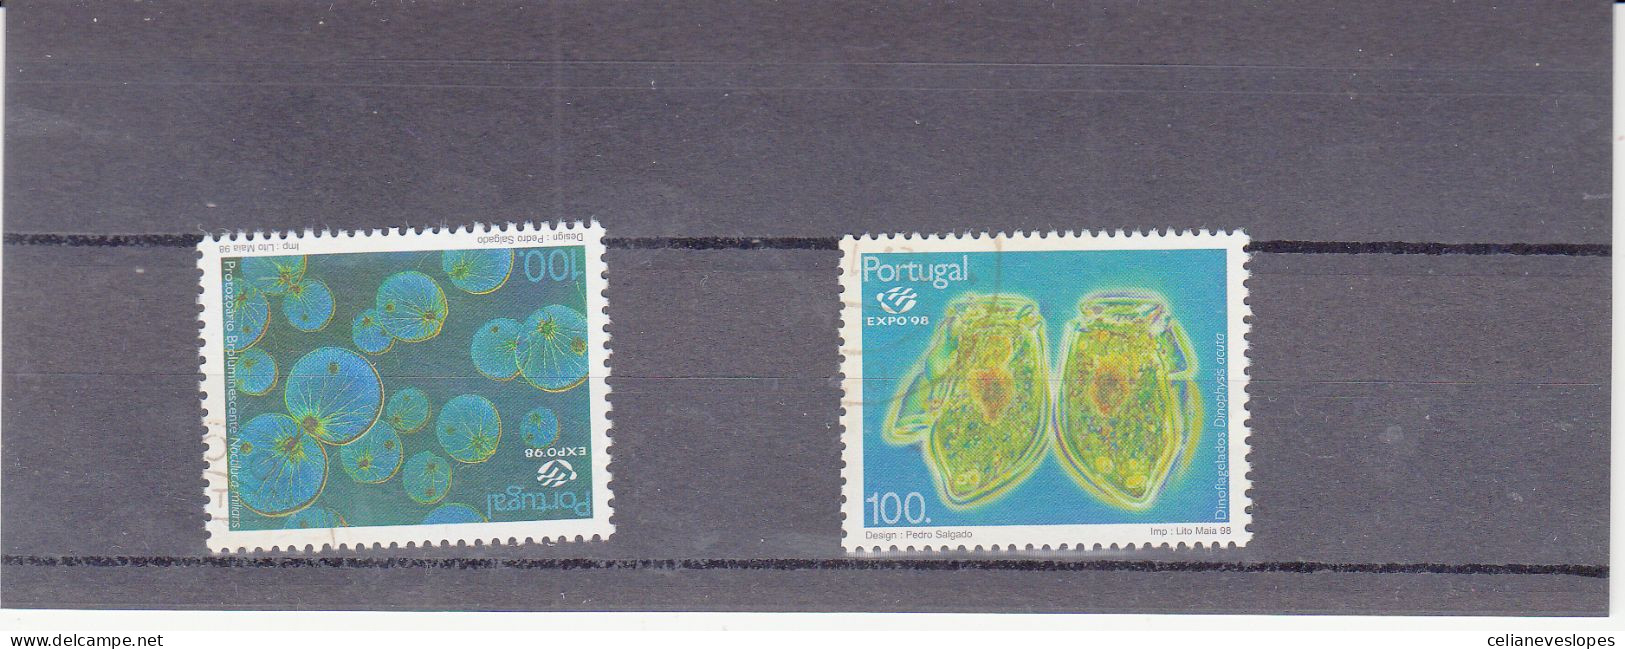 Portugal, EXPO 98, 1998, Mundifil Nº 2479 A 2480 Used - Gebraucht